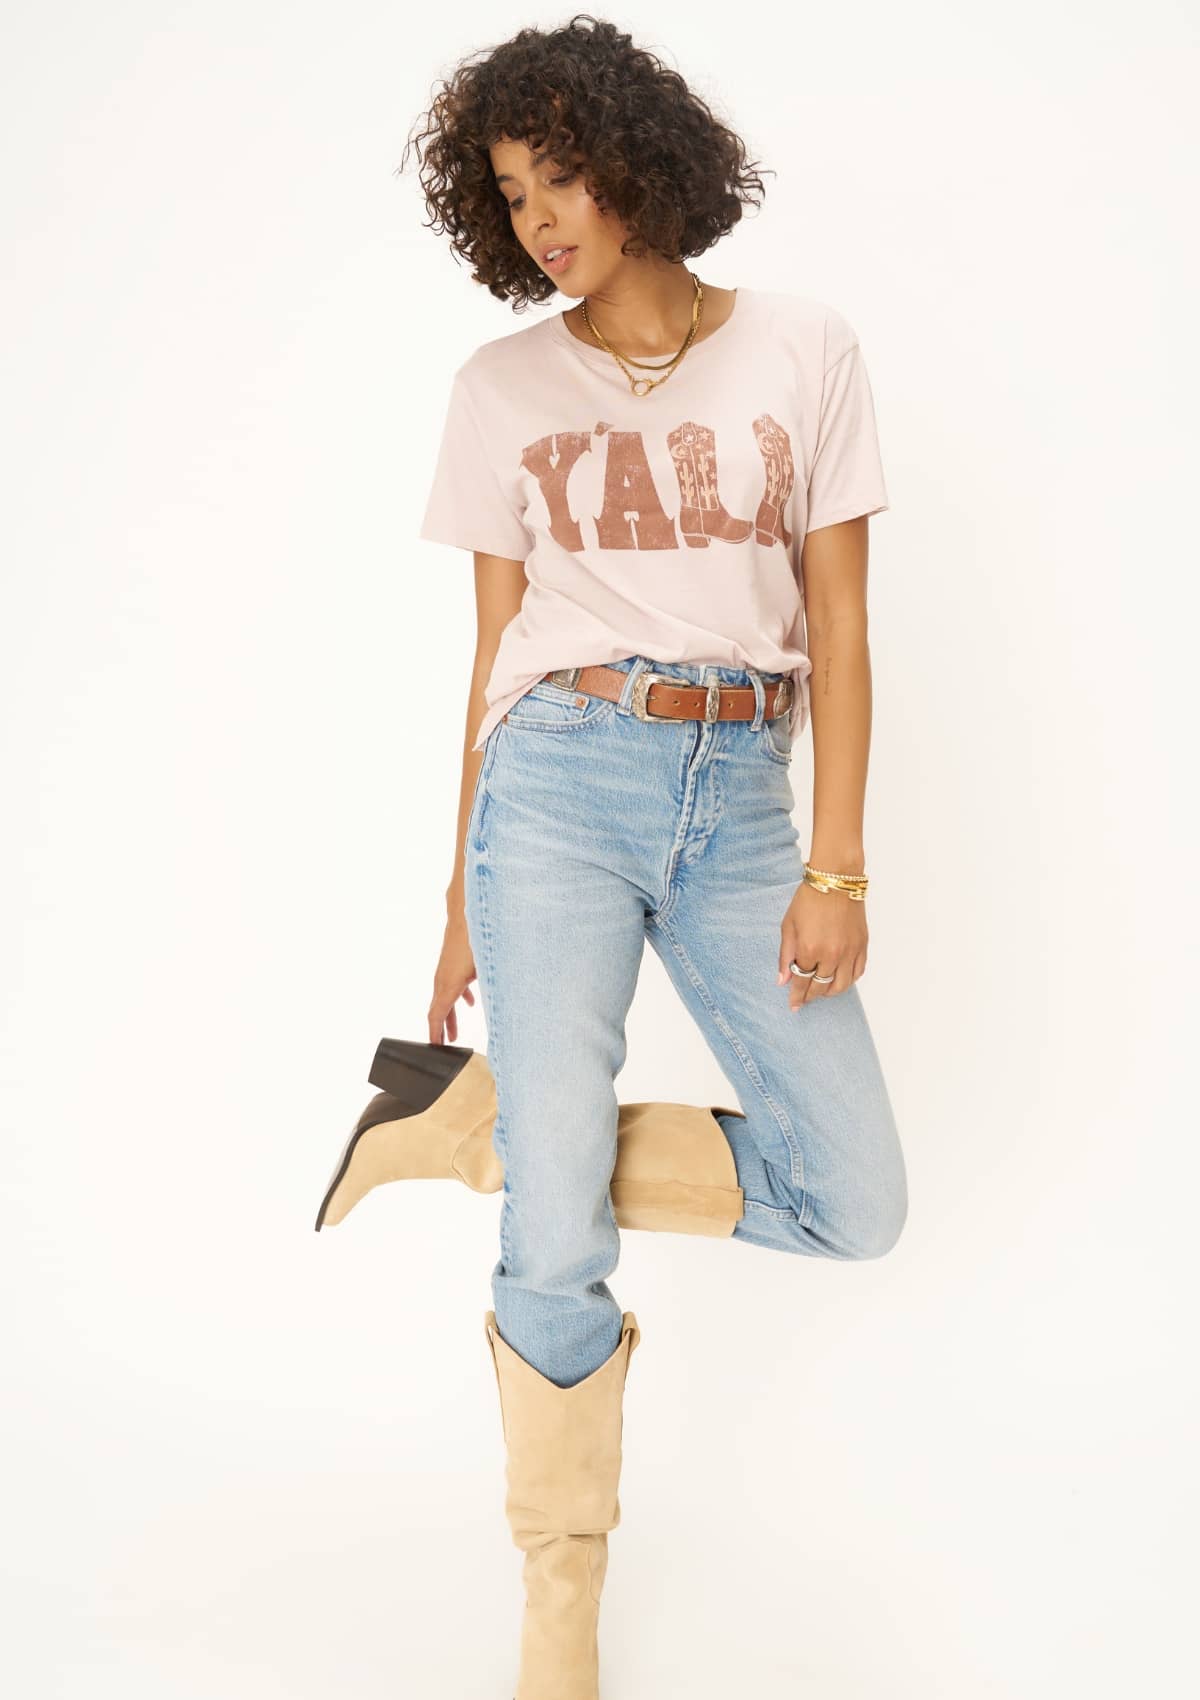 Y'all Tee -Project Social T- Ruby Jane-